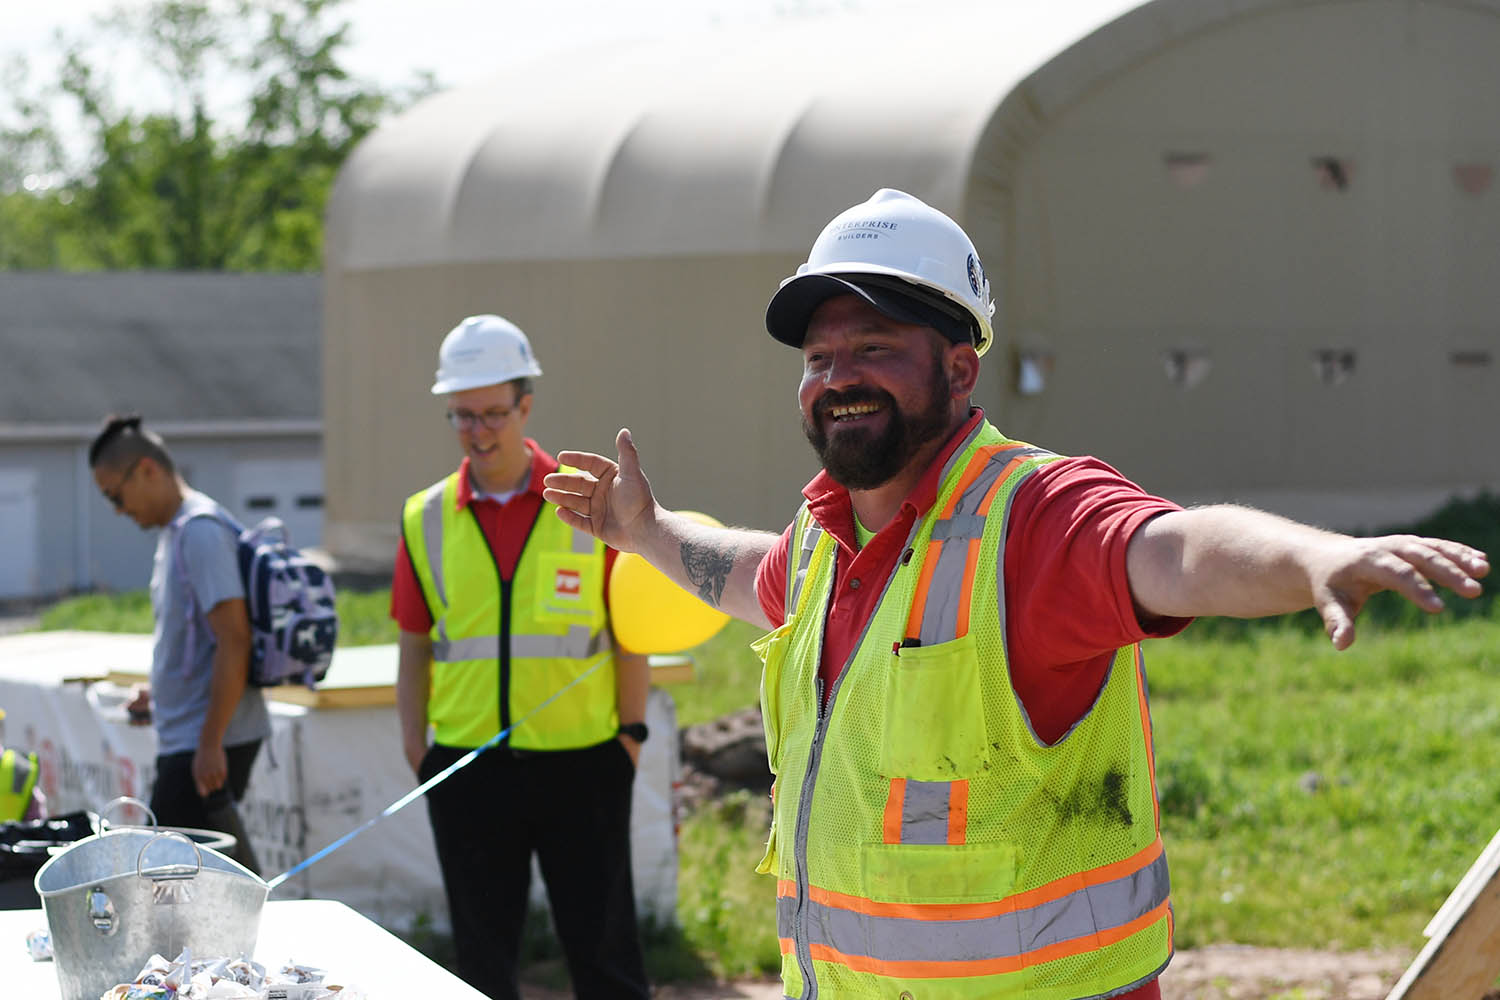 Eric Lamore is the Site Supervisor for Enterprise Builders Inc (EBI), the Construction Management firm on the job. 